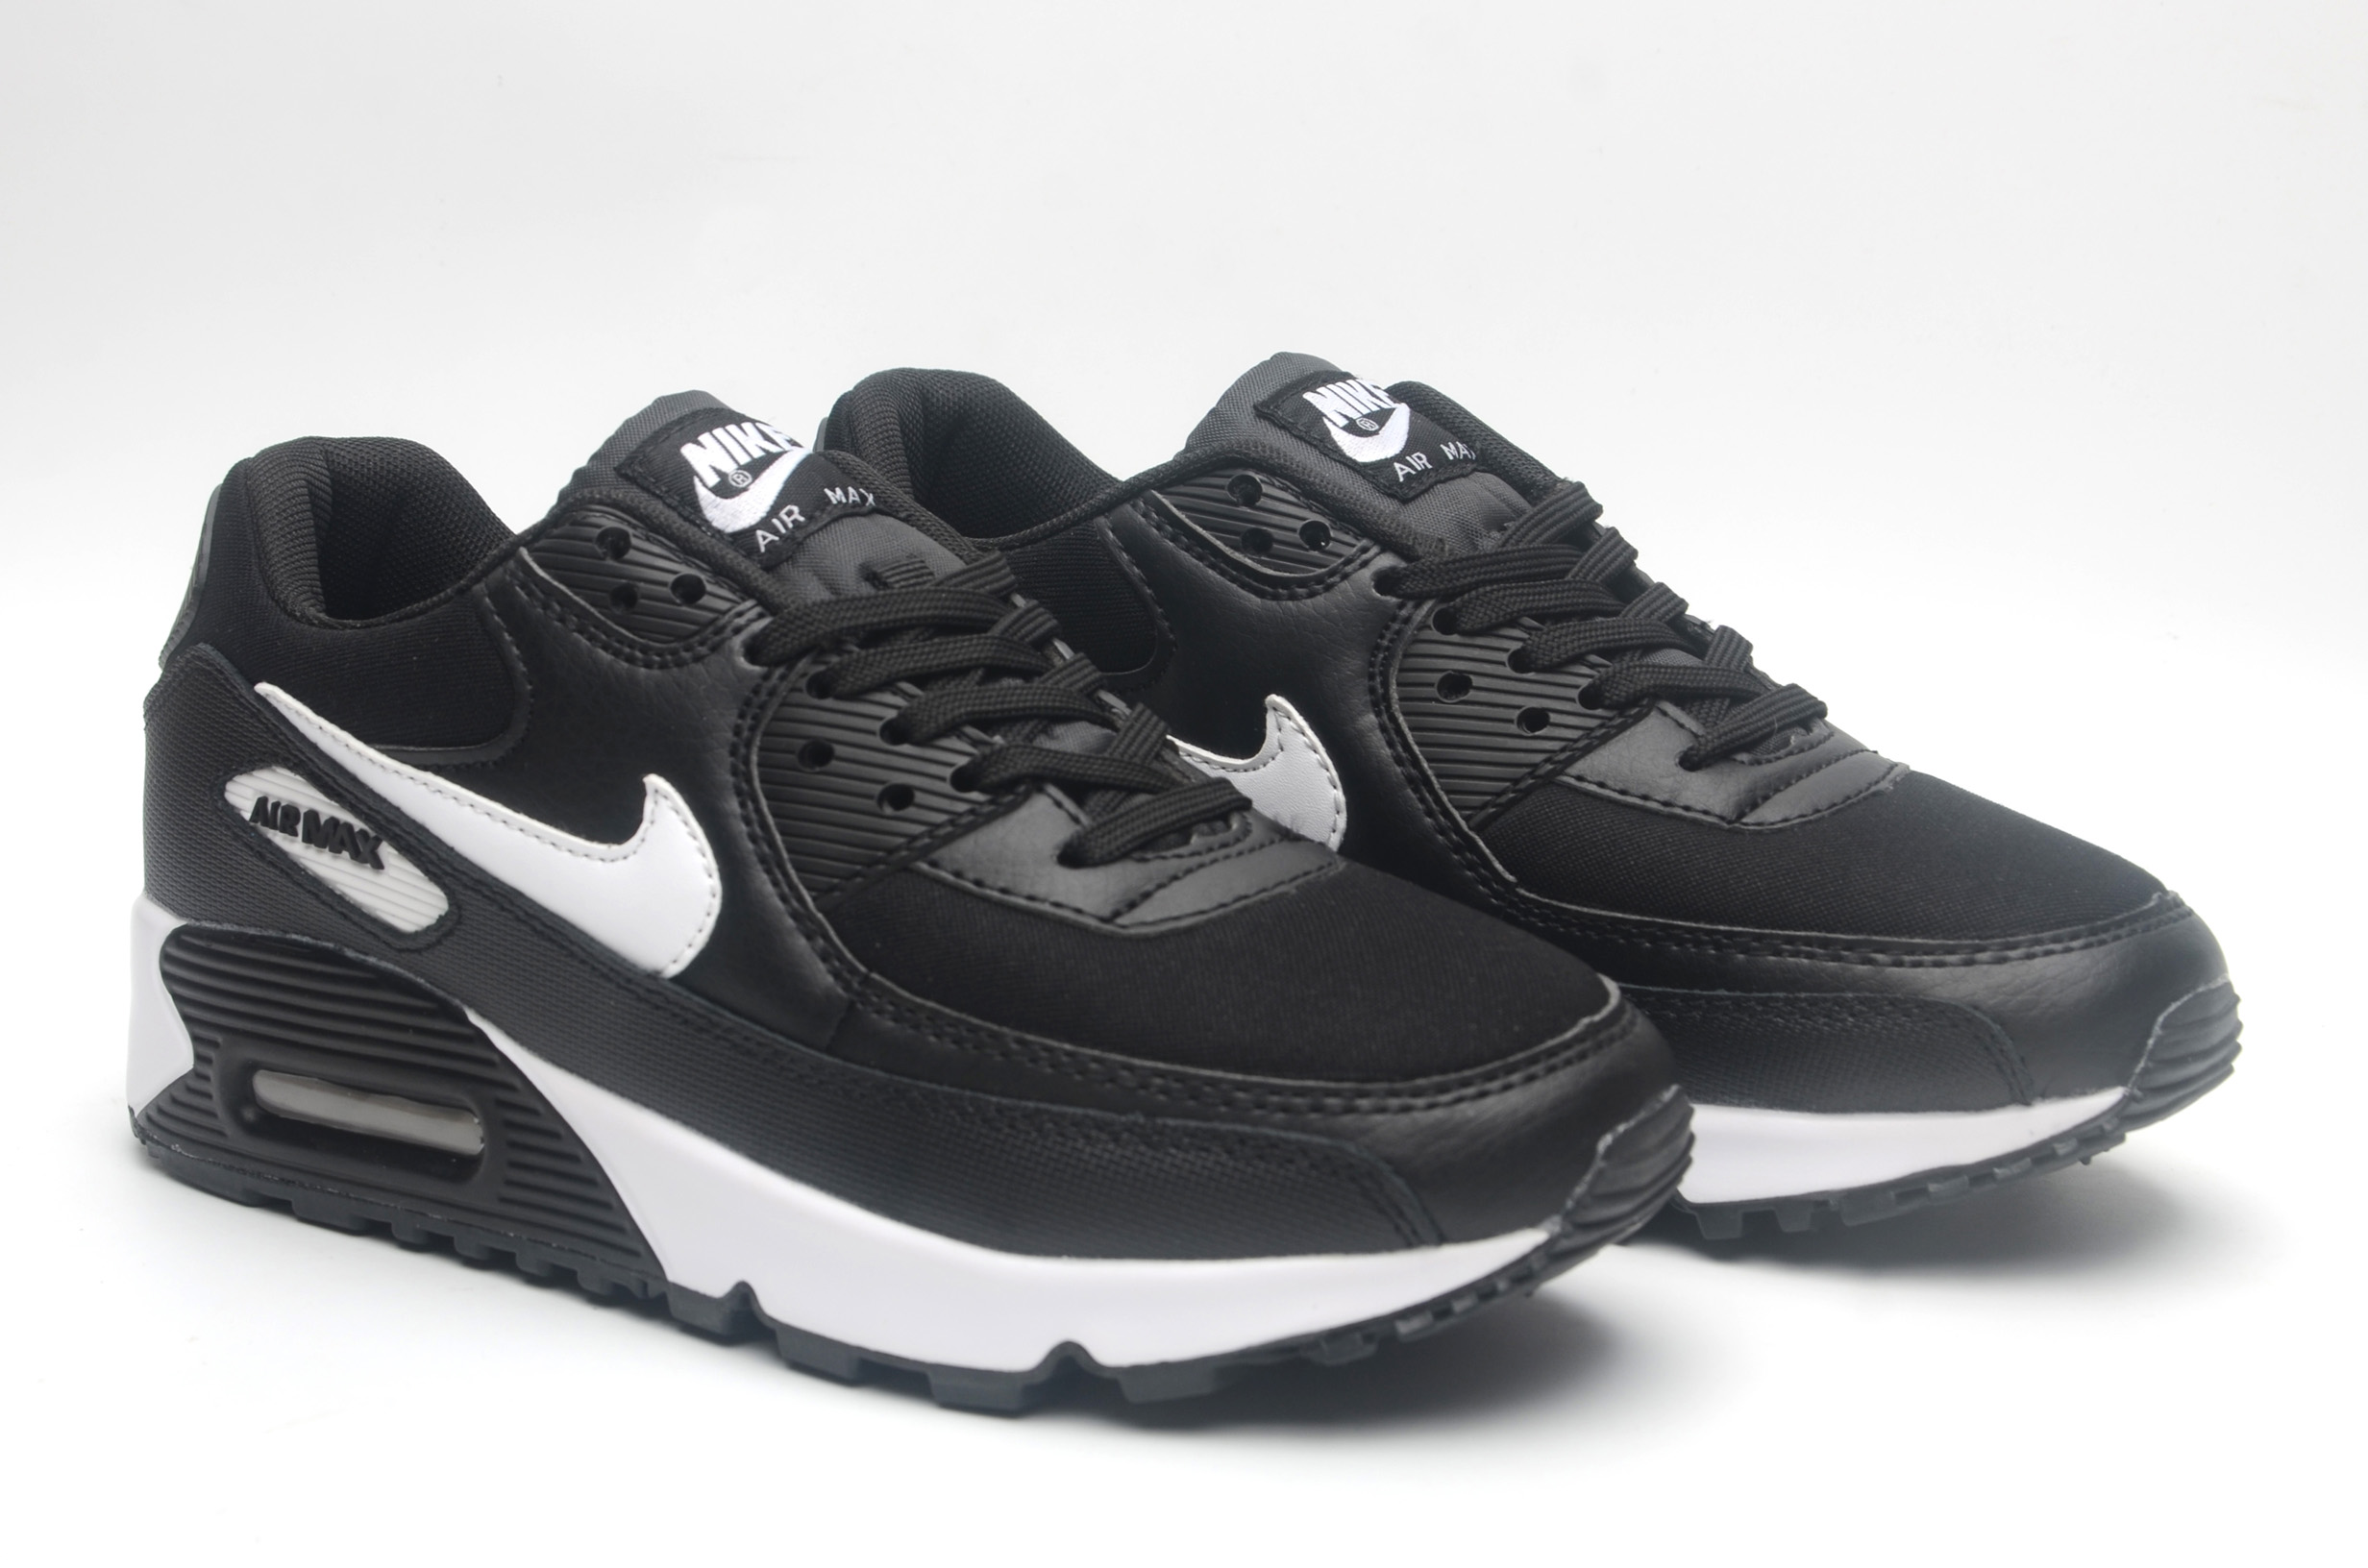 Women's Running weapon Air Max 90 Shoes 024